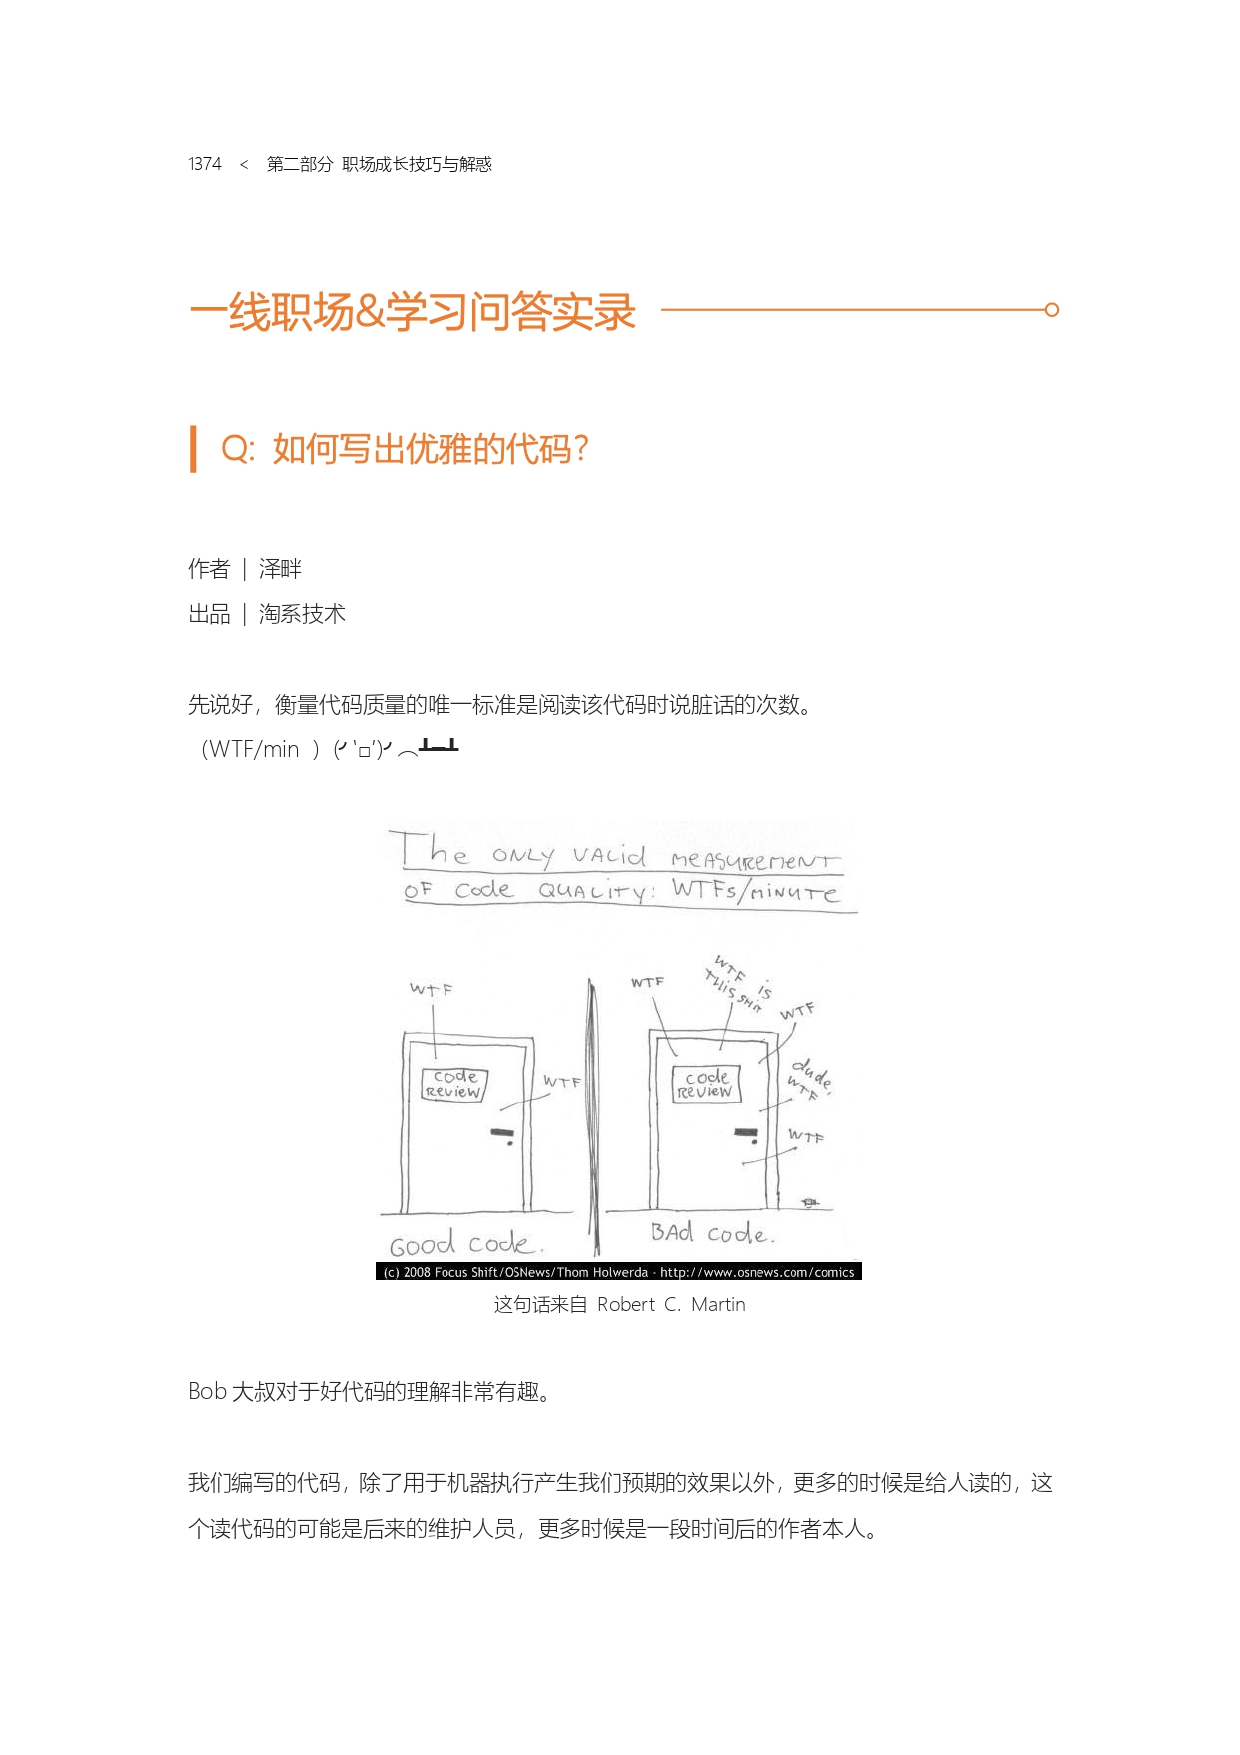 The Complete Works of Tao Technology 2020-1313-1671-1-195_page-0062.jpg